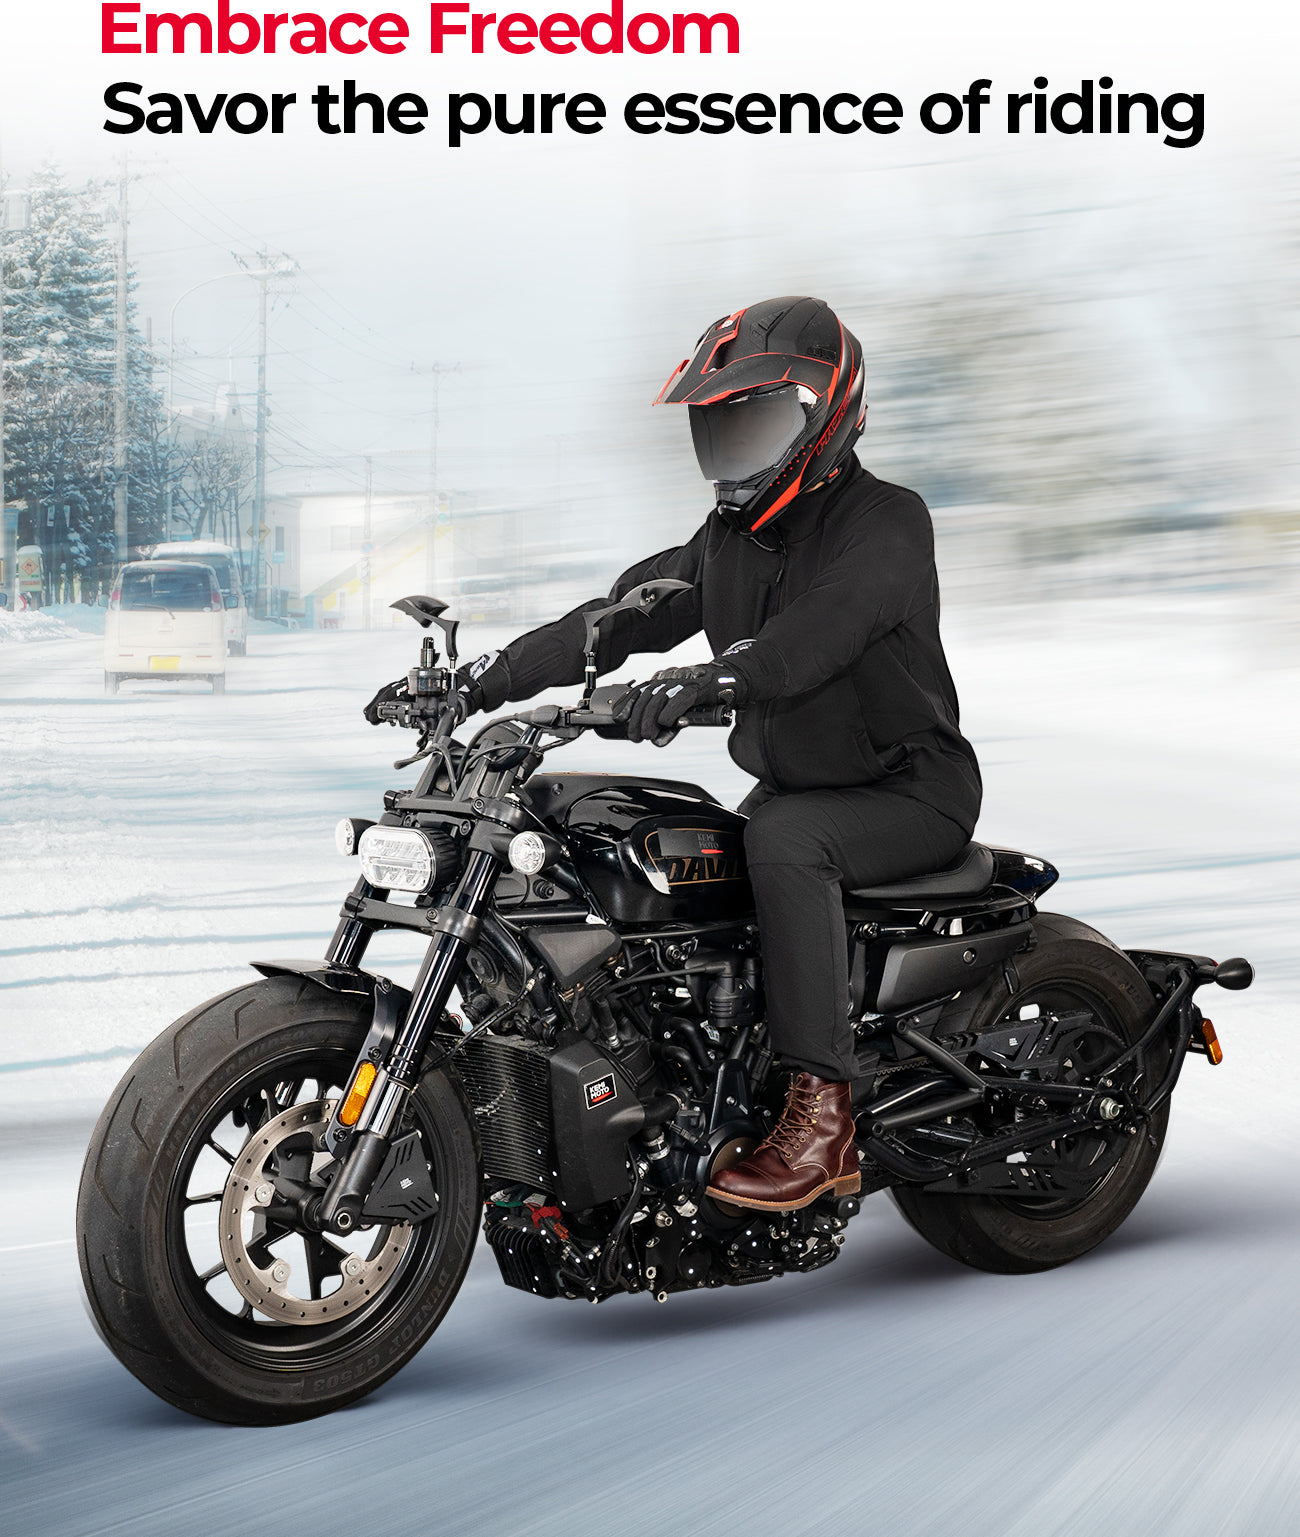 12V Heated Jacket for Motorcycle Riding